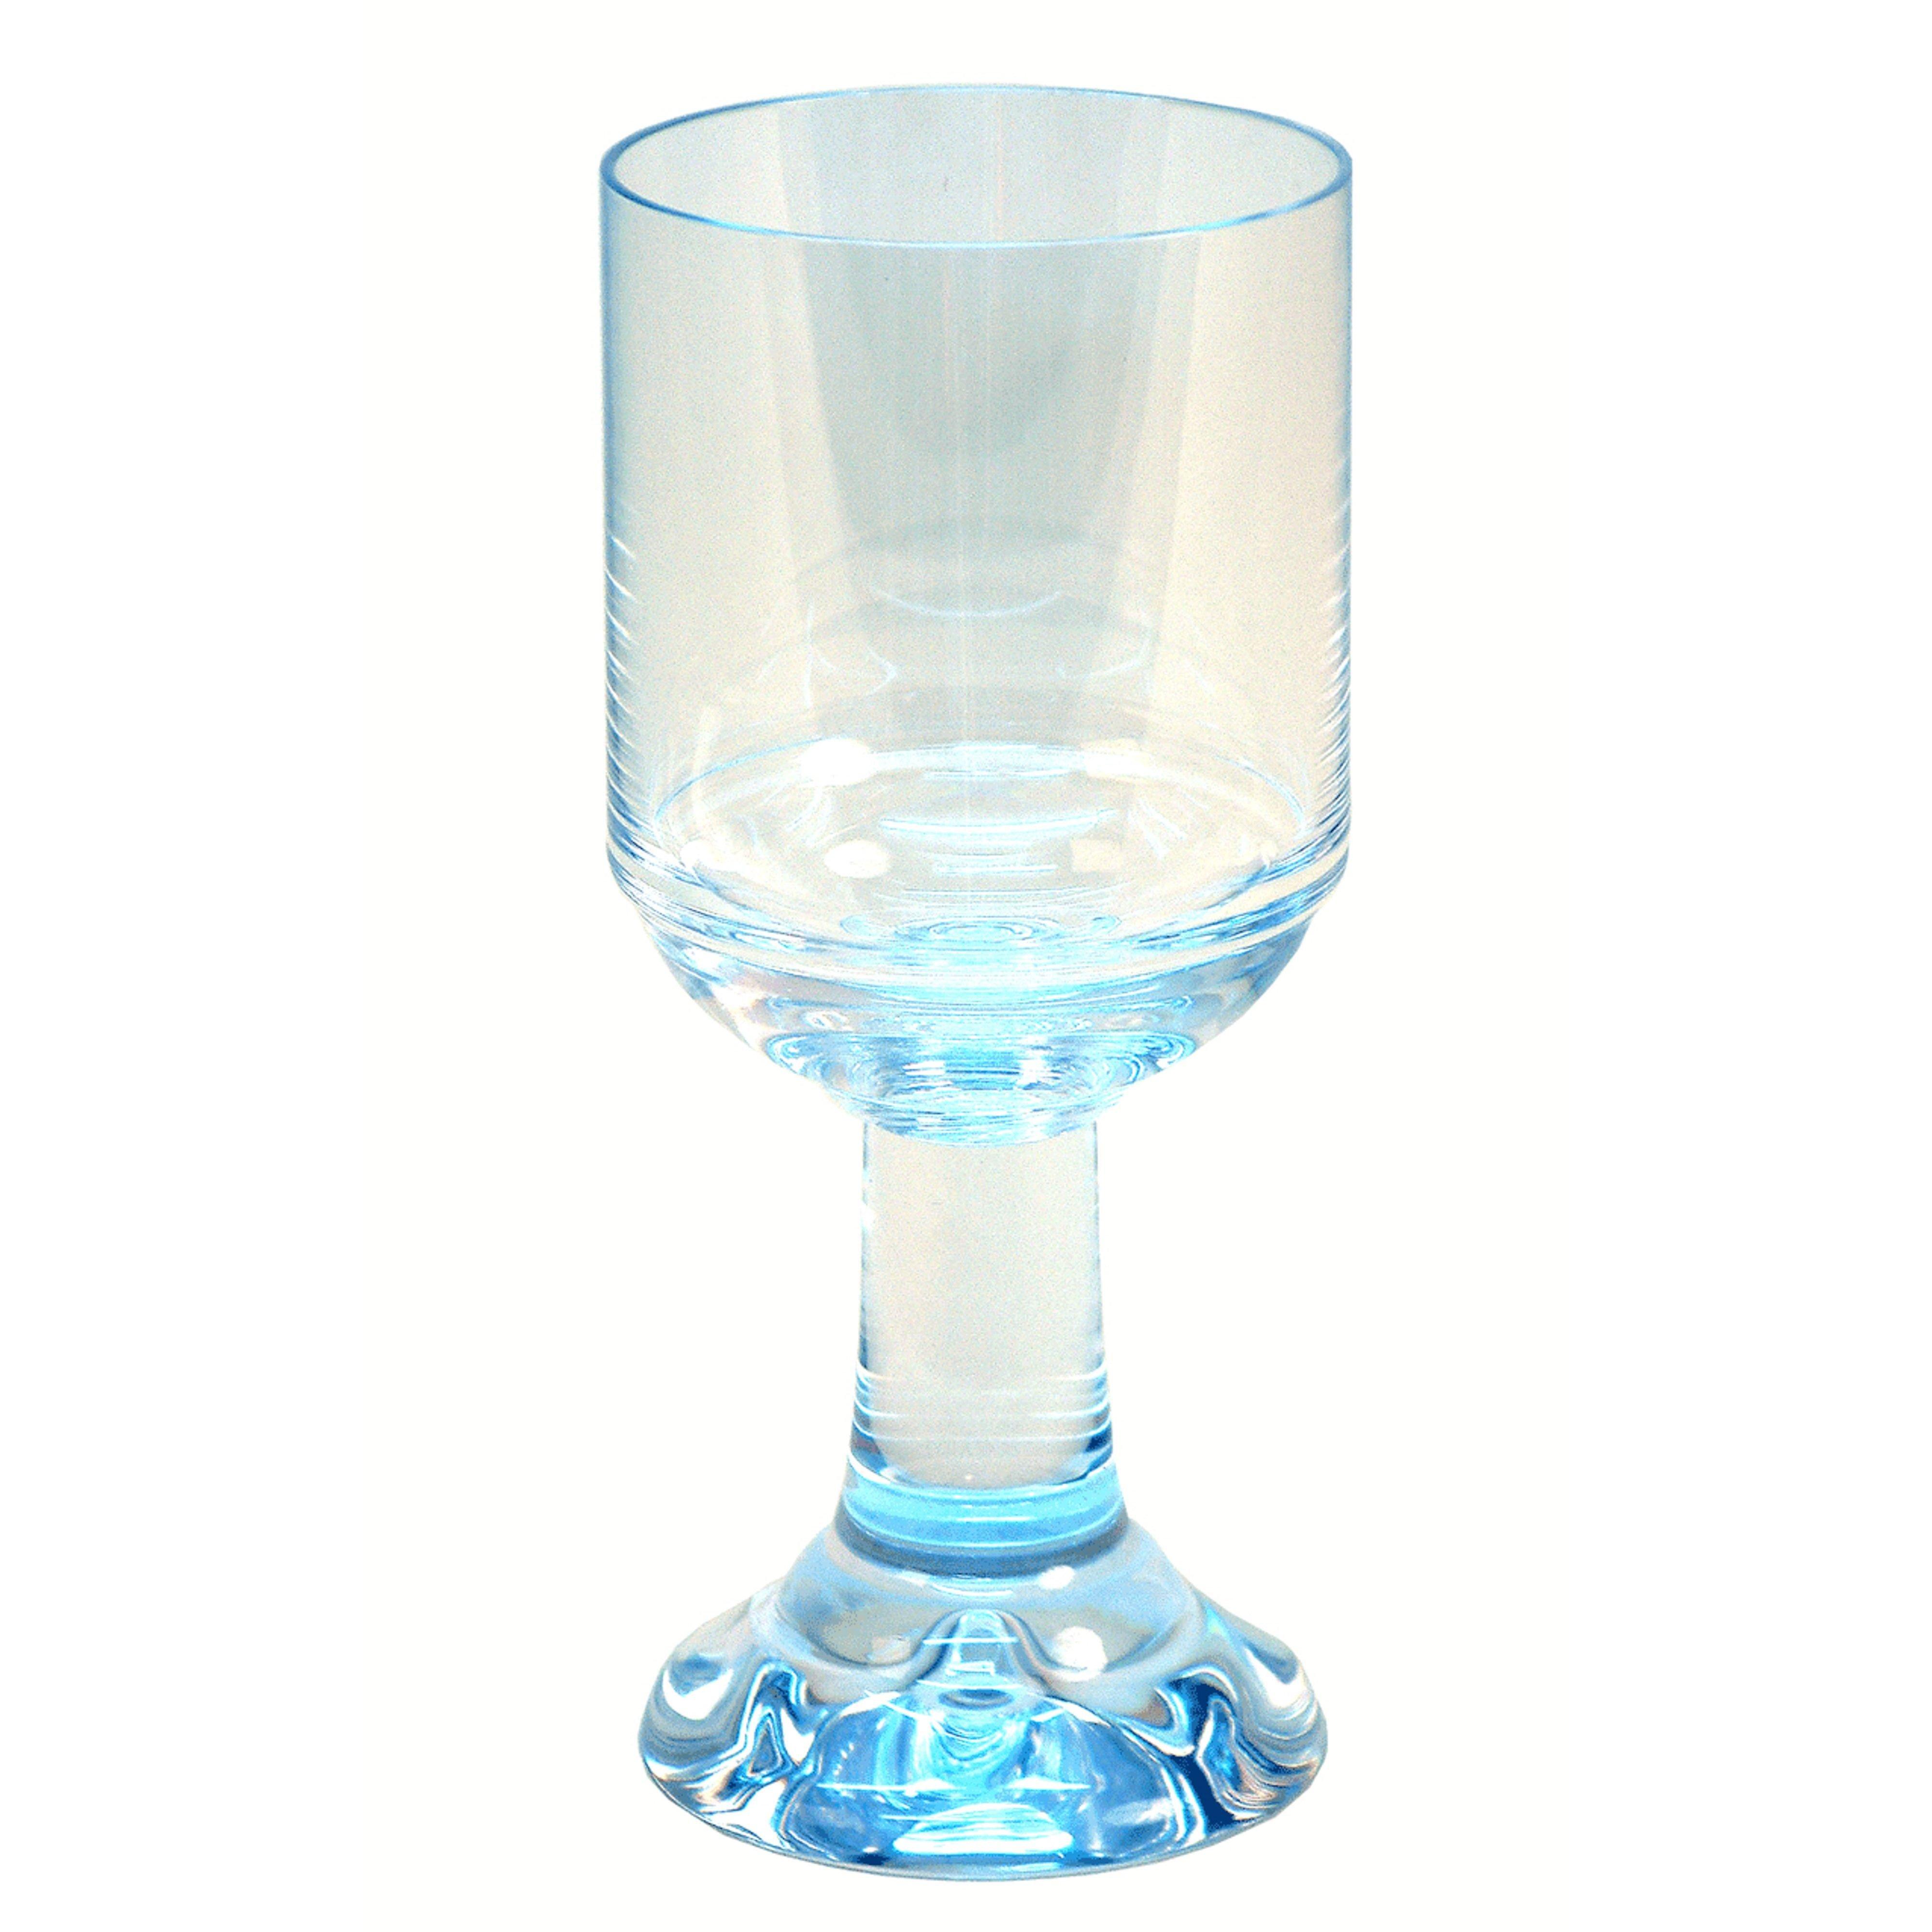 Quest Everlasting Camping Wine Glass Review